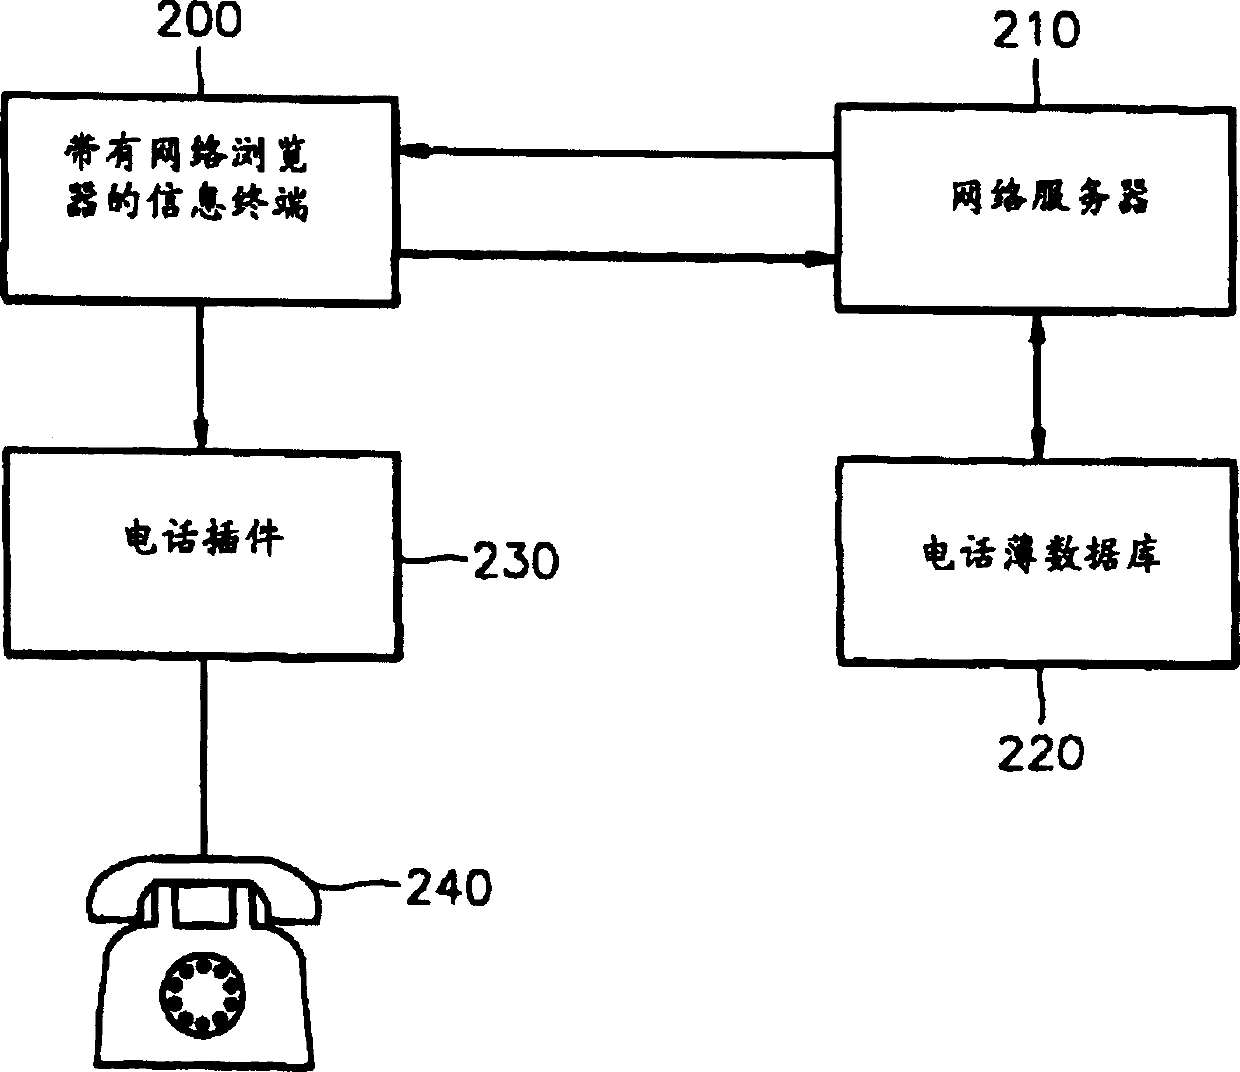 Telephone number searching system supporting automatic telephone connection and method therefor